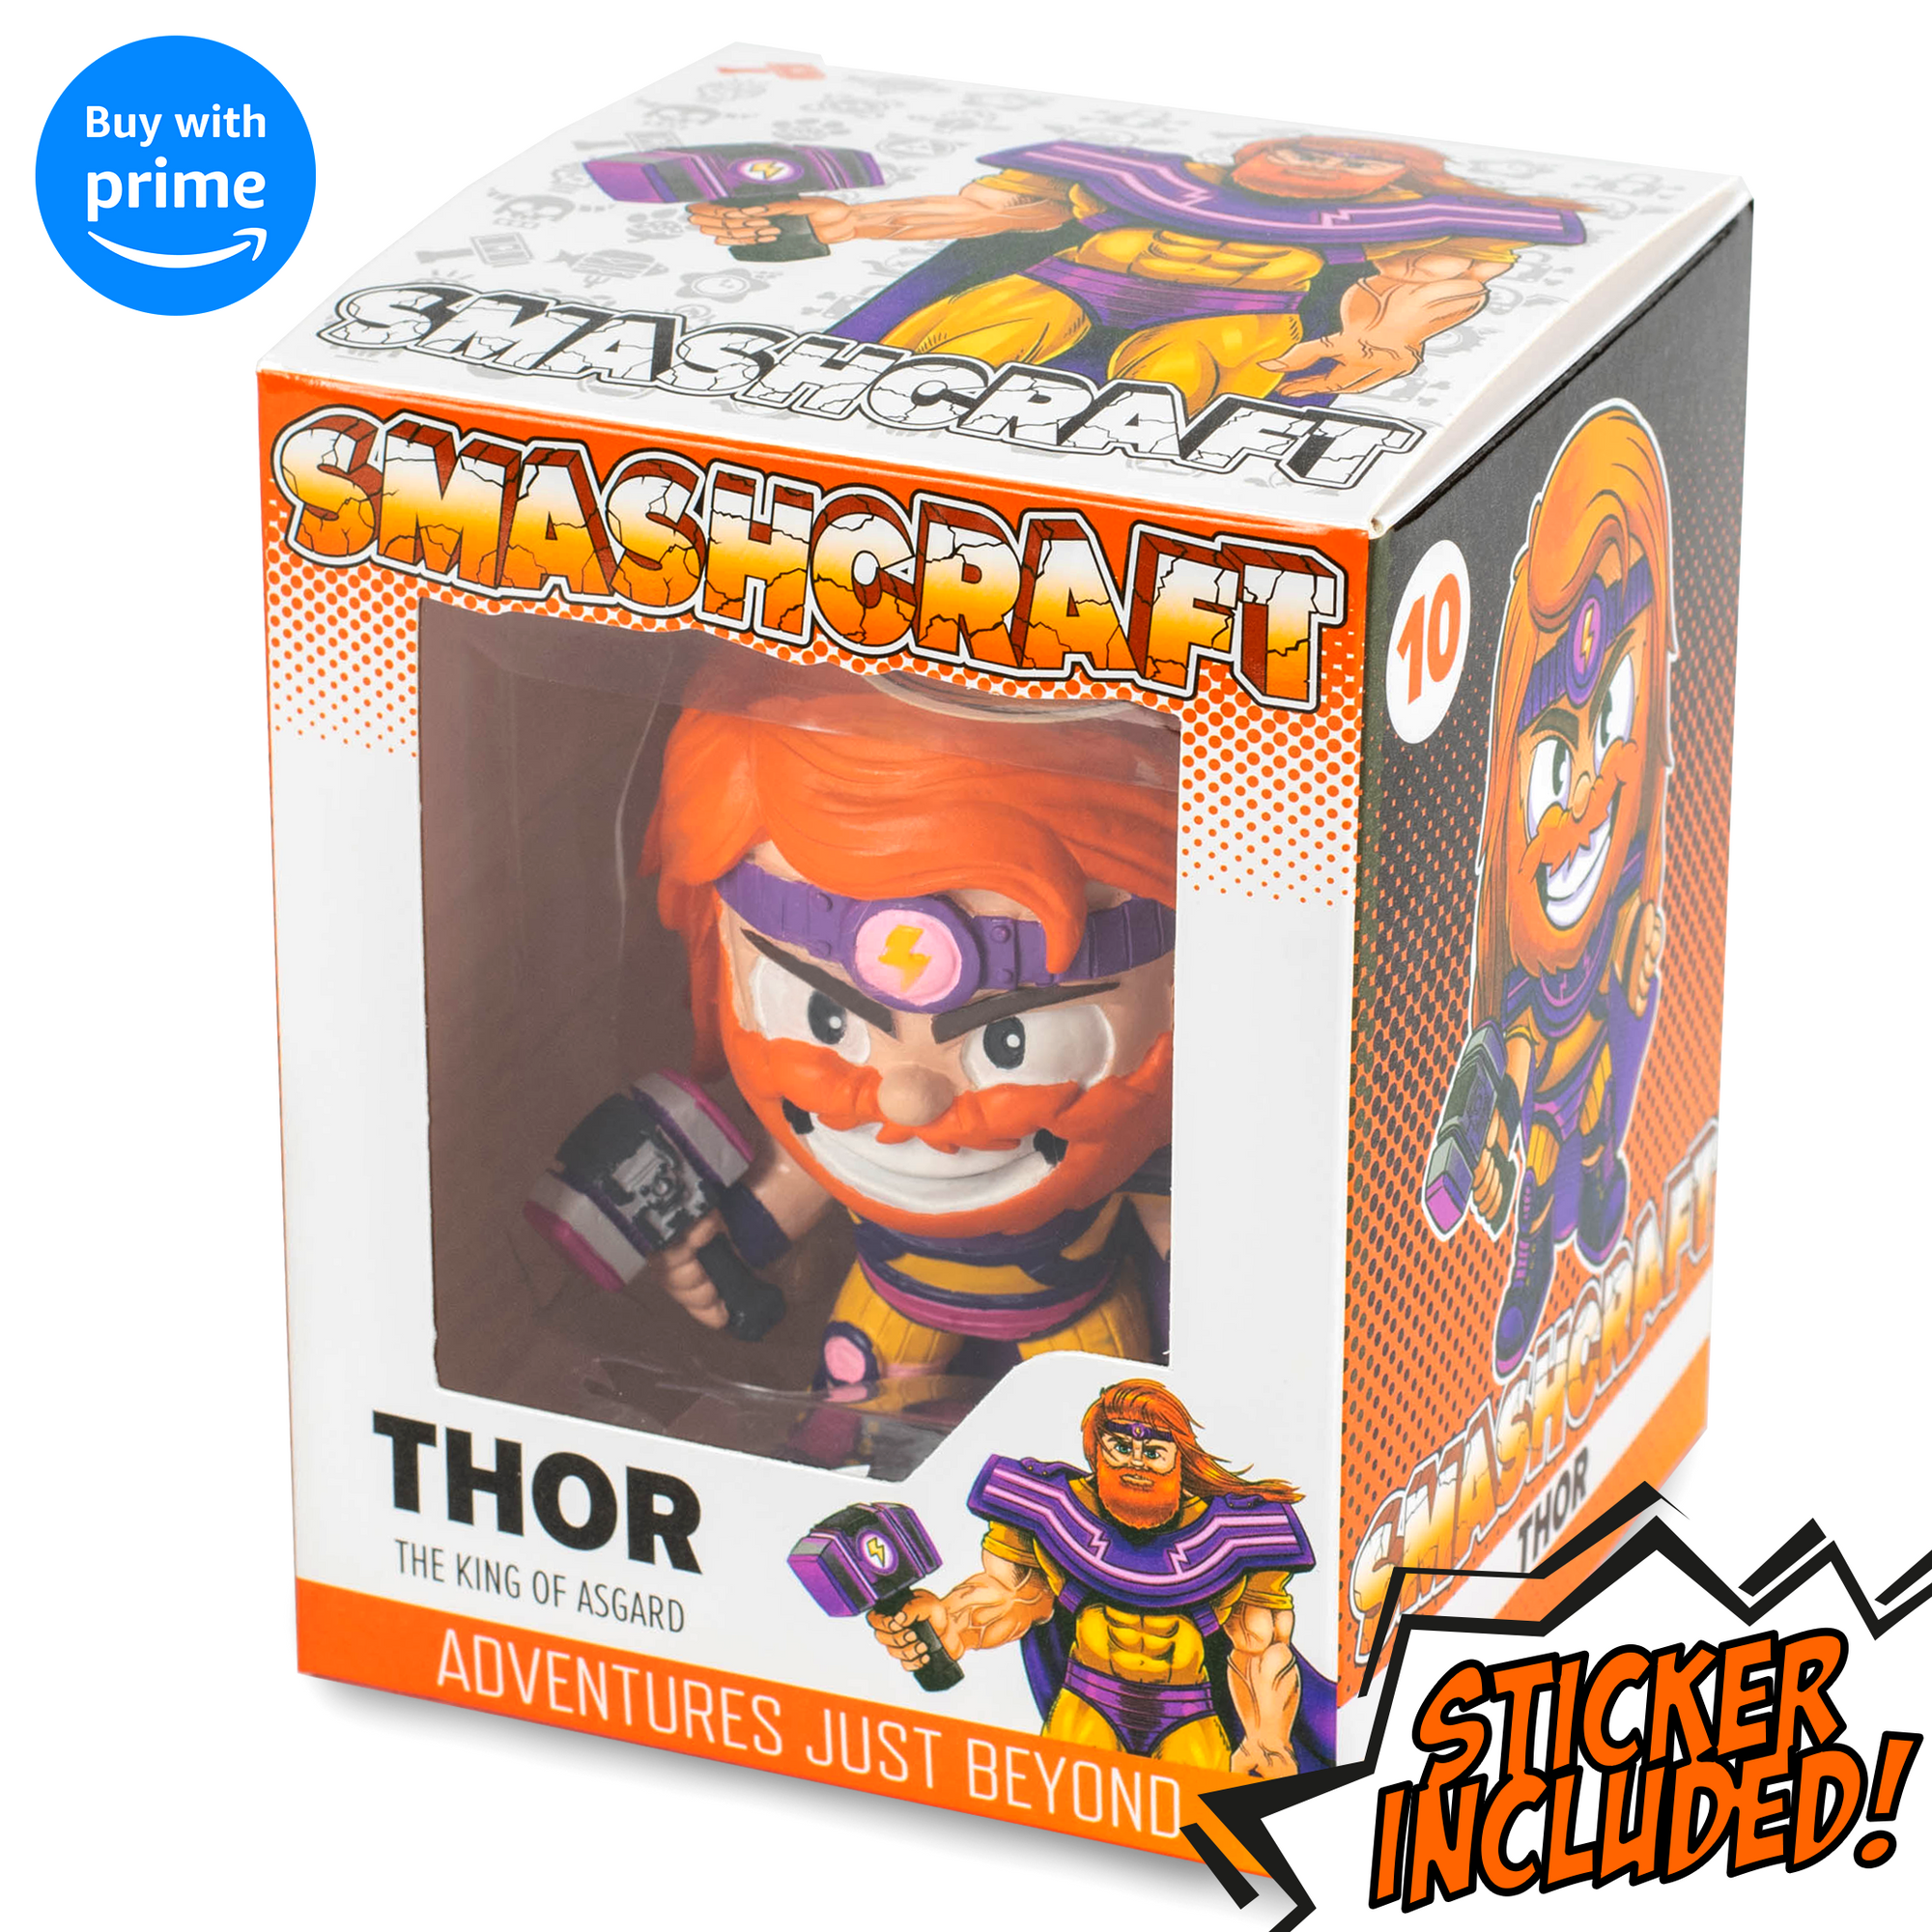 Smashcraft Thor collectors box, with back story and memorabilia mythology character sticker